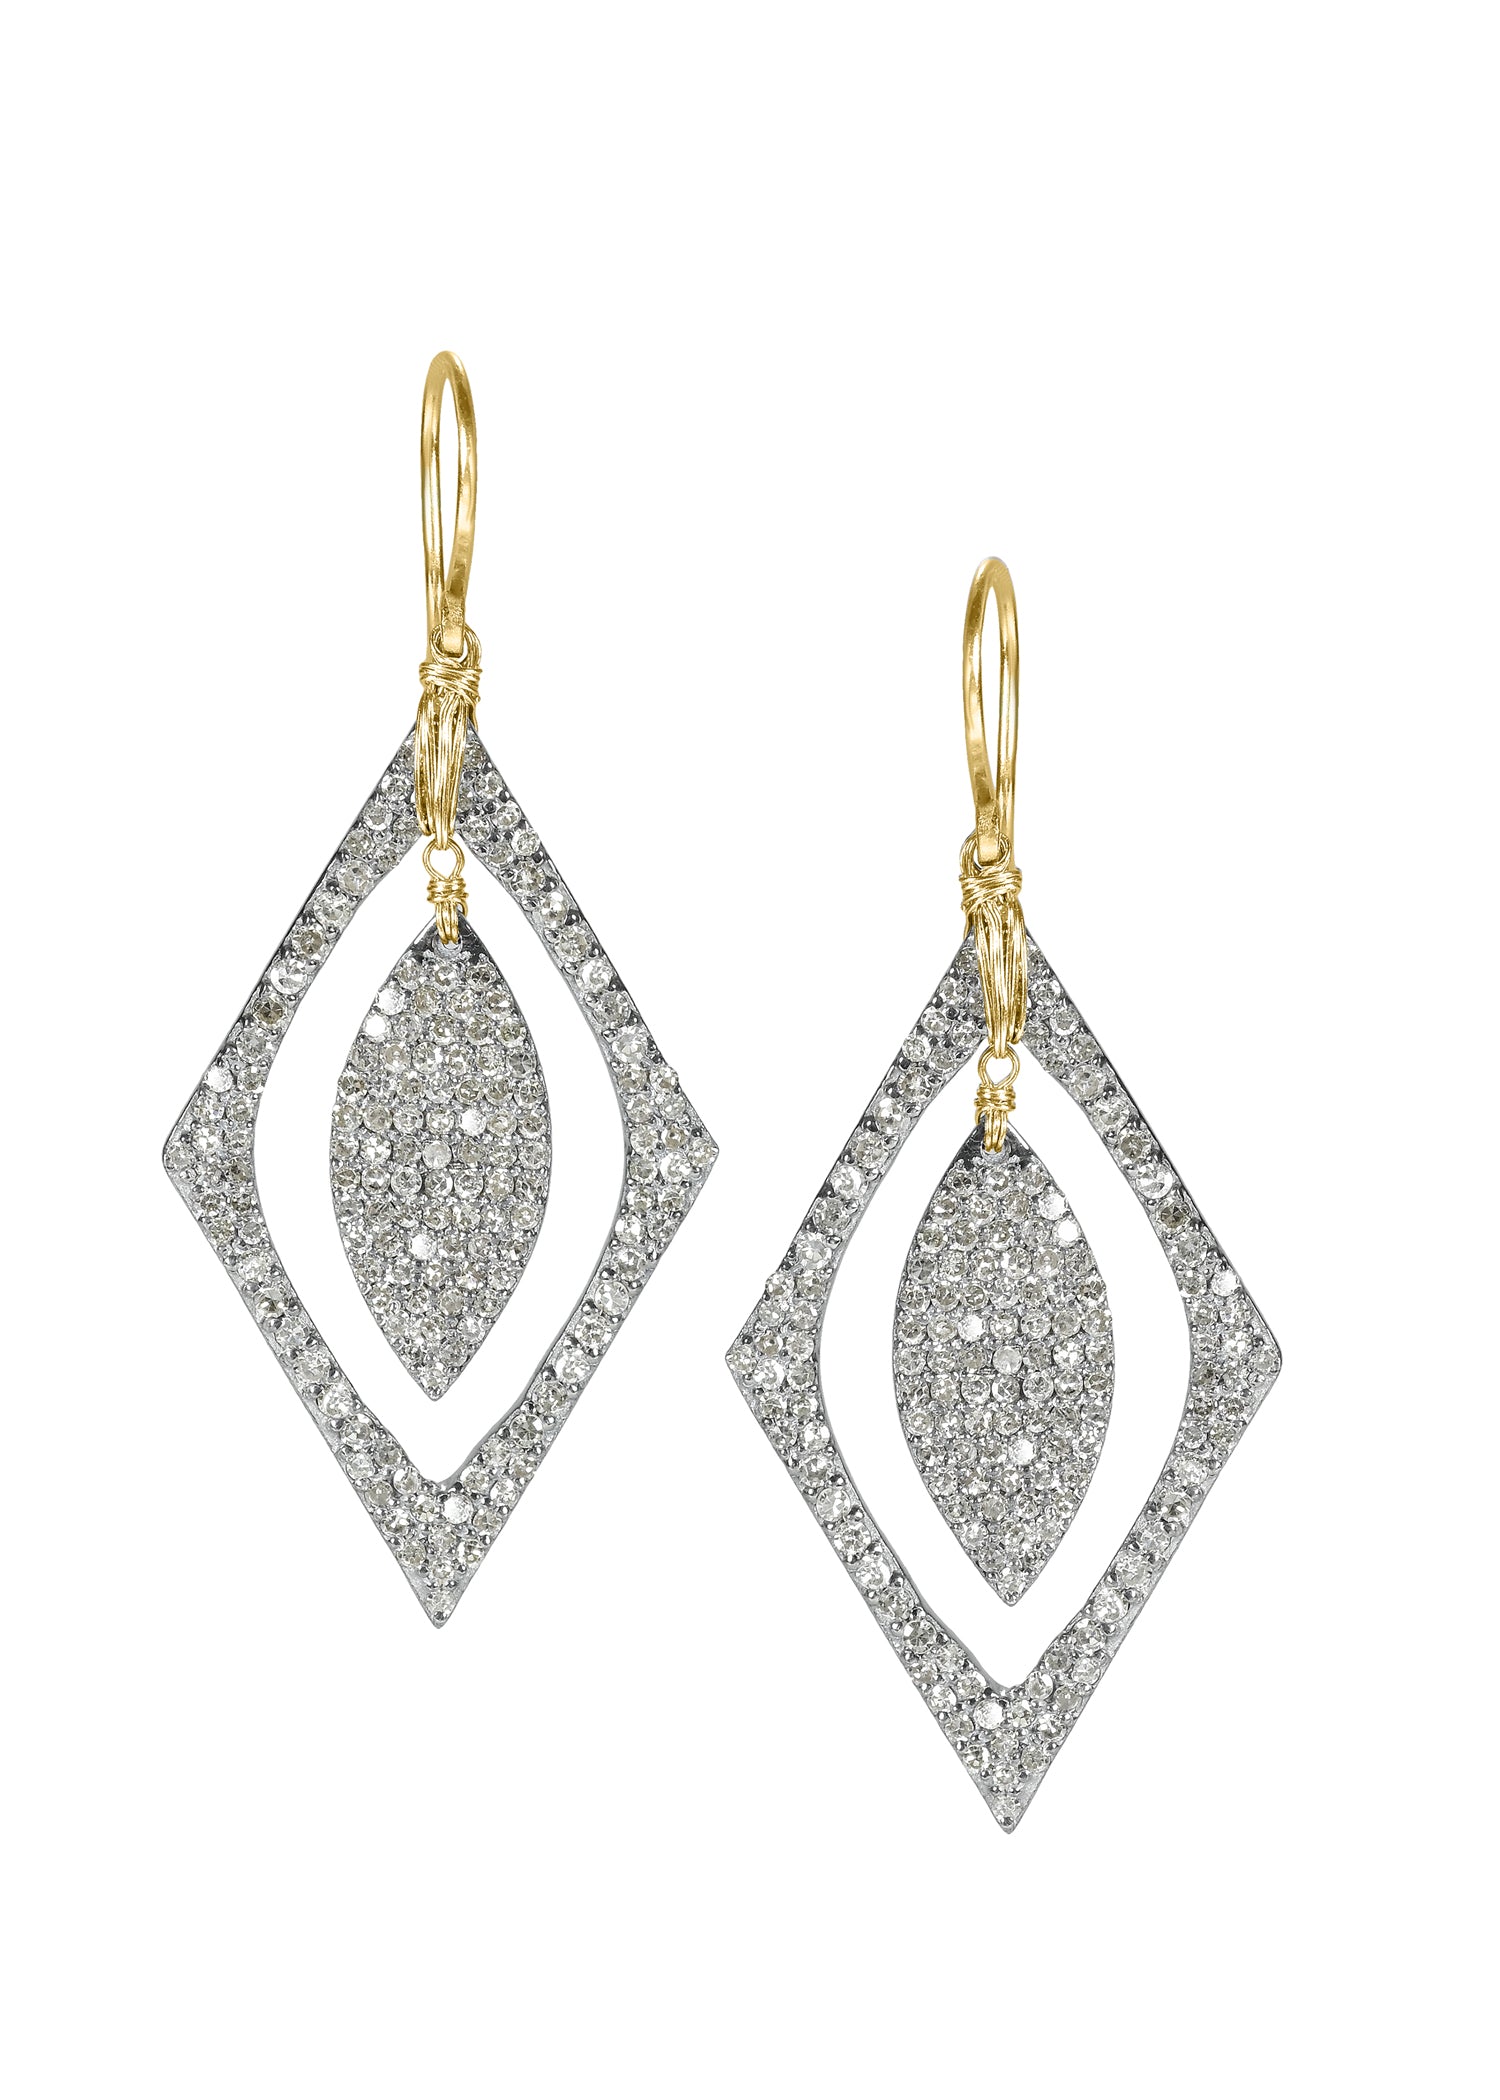 Diamond 14k gold Sterling silver Mixed metal Special order only Earrings measure 2" in length (including the ear wires) and 7/8" in width at the widest point Handmade in our Los Angeles studio 